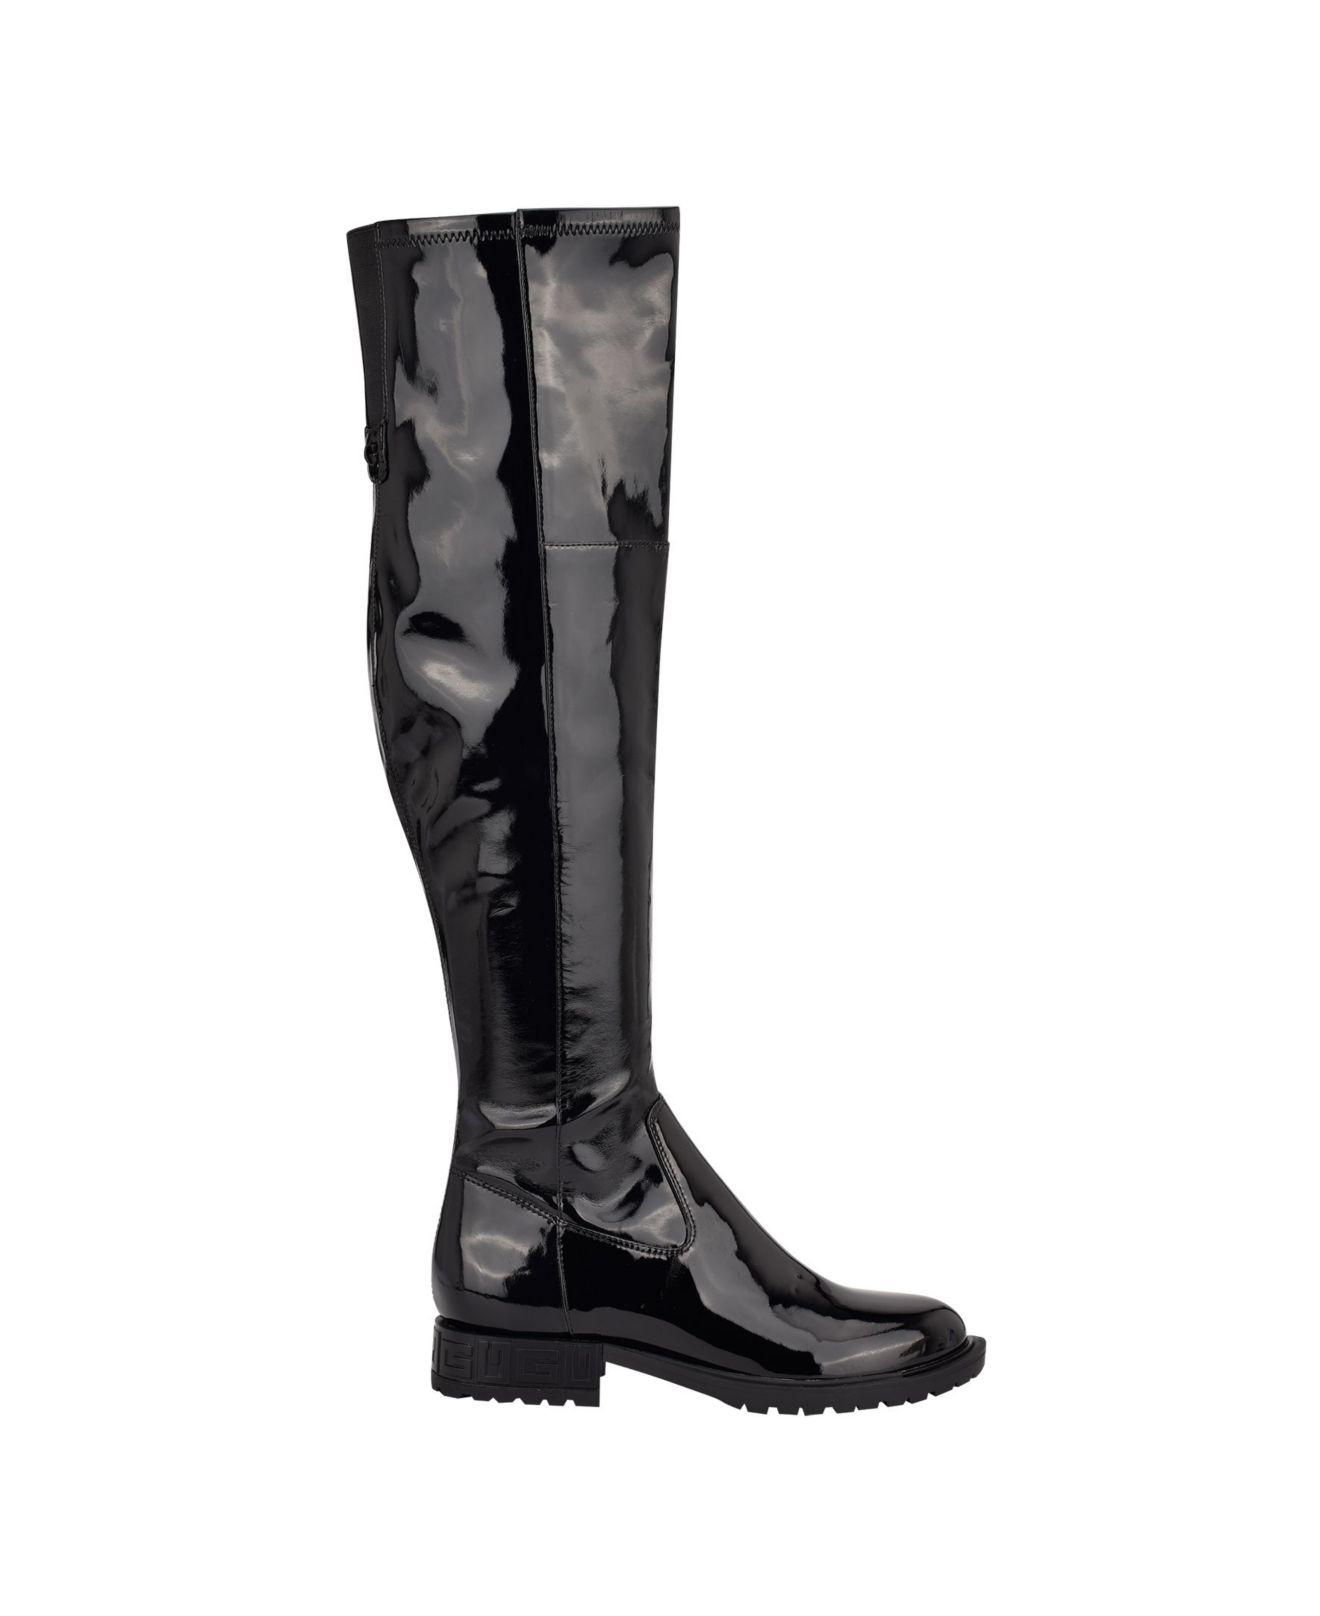 Guess Raniele Over The Knee Boots in Black Patent (Black) - Lyst